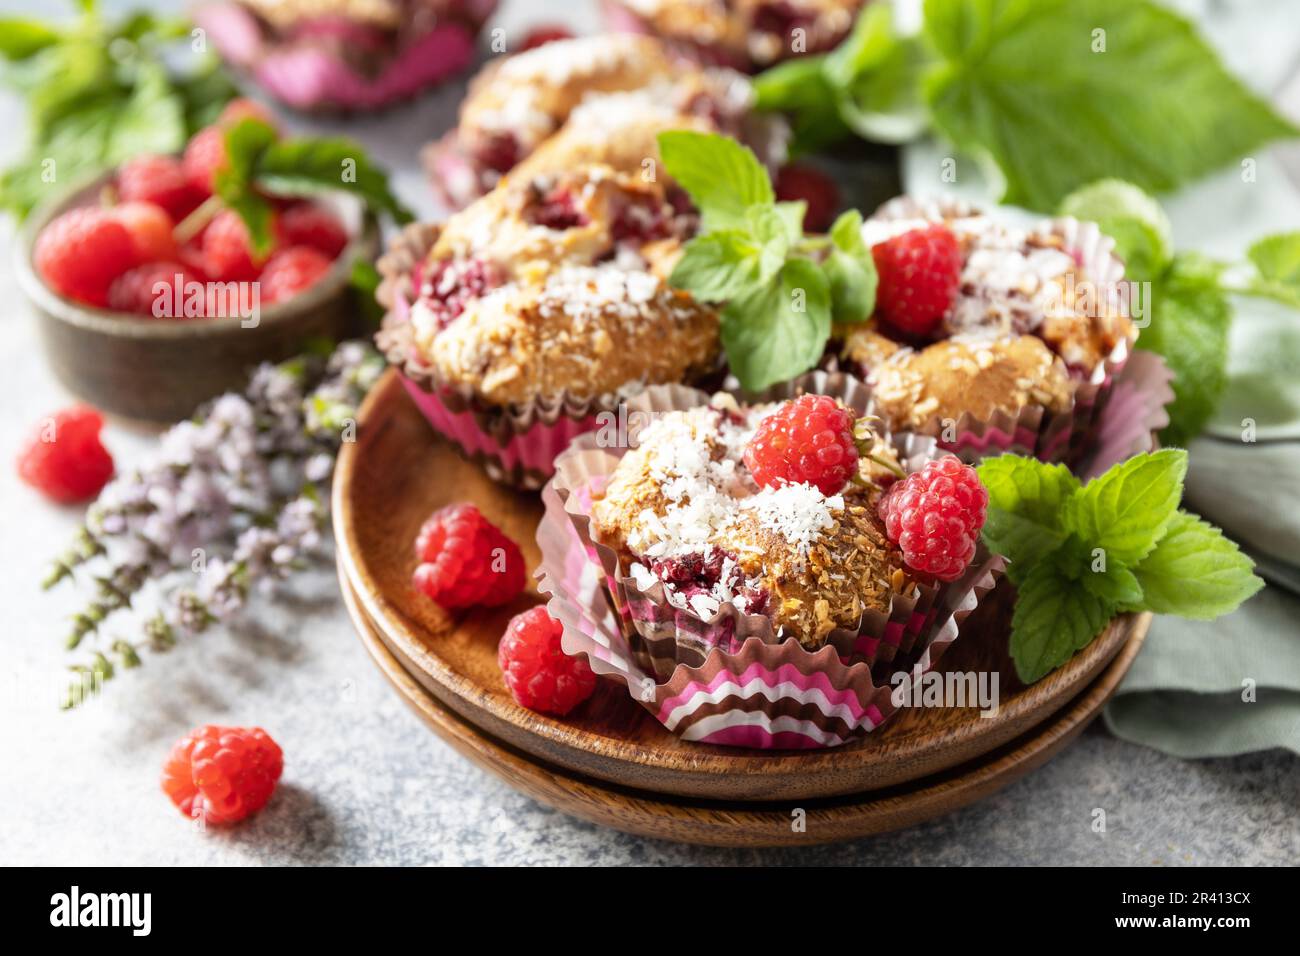 Healthy dessert. Vegan gluten-free pastry. Oatmeal banana muffins with raspberry and coconut flakes on a stone table. Stock Photo